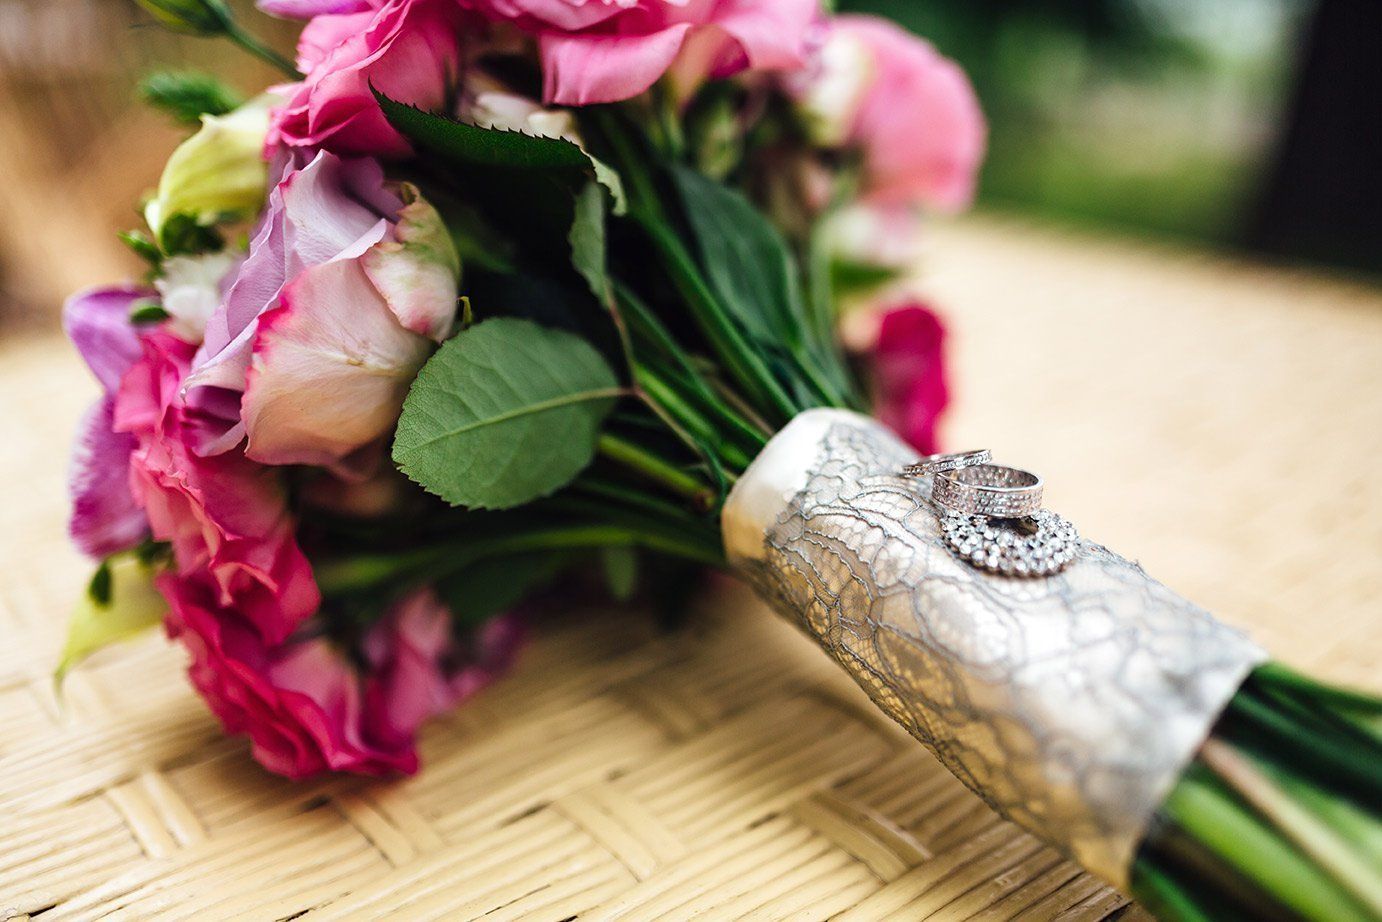 a bouquet of pink flowers sits next to a silver ring